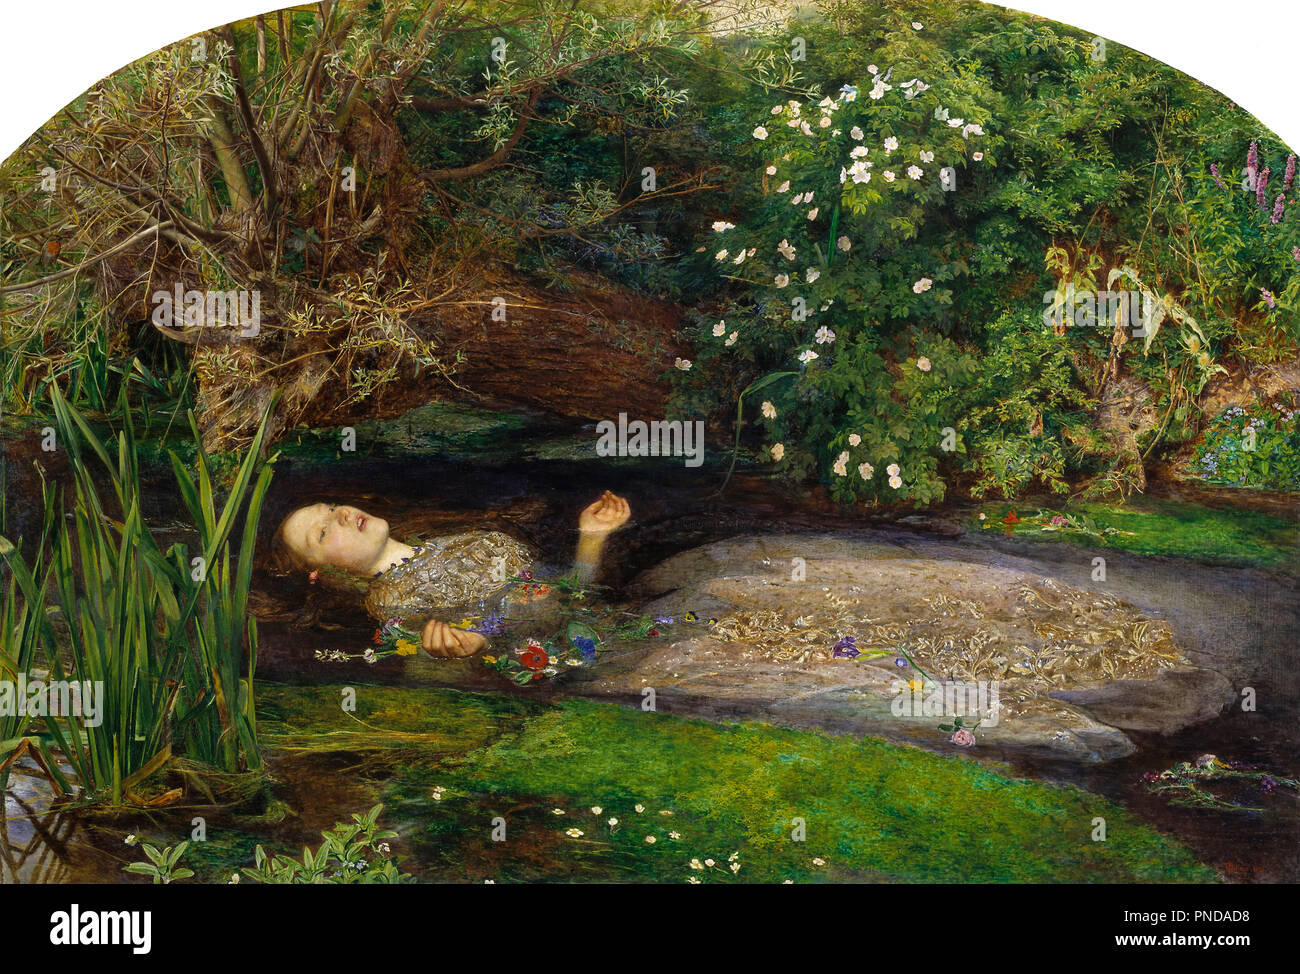 Ophelia   Ophélie. Date/Period: Ca. 1851. Painting. Oil on canvas. Height: 76.2 cm (30 in); Width: 111.8 cm (44 in). Author: JOHN EVERETT MILLAIS. MILLAIS, JOHN EVERETT. MILLAIS, SIR JOHN EVERETT. Stock Photo